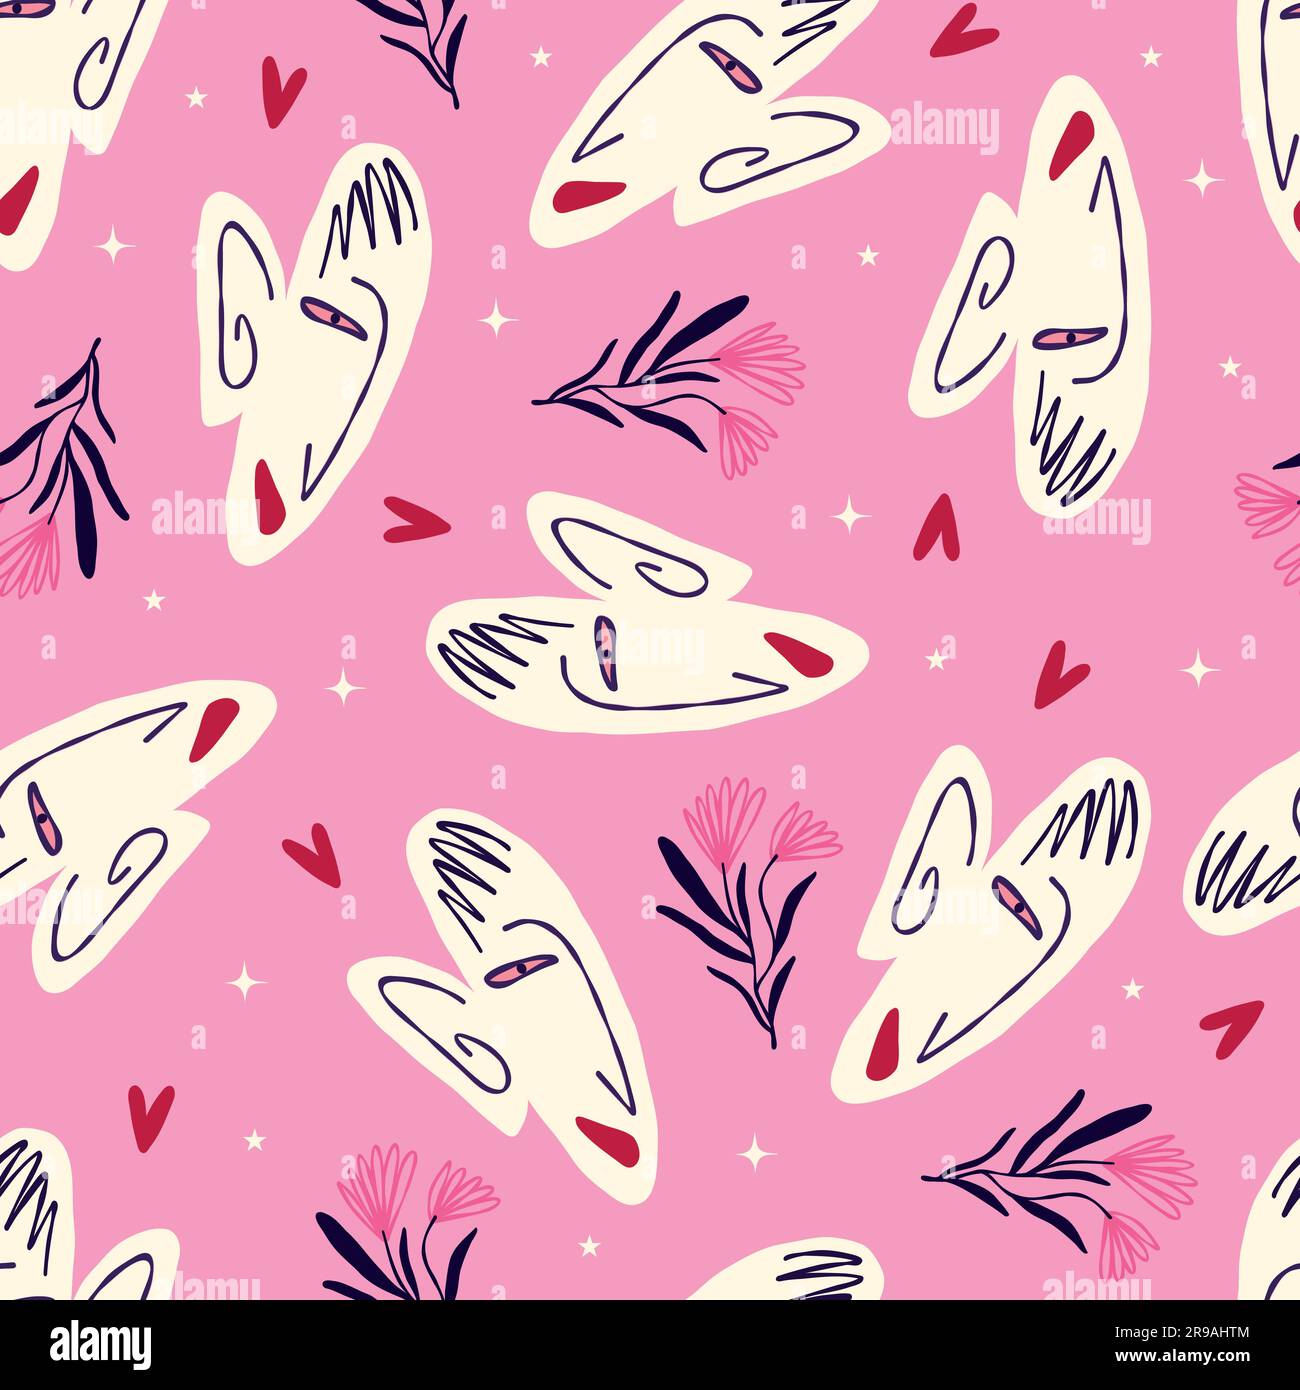 Pink Vibrant Feminine Aesthetic pattern with abstract painted faces and ...